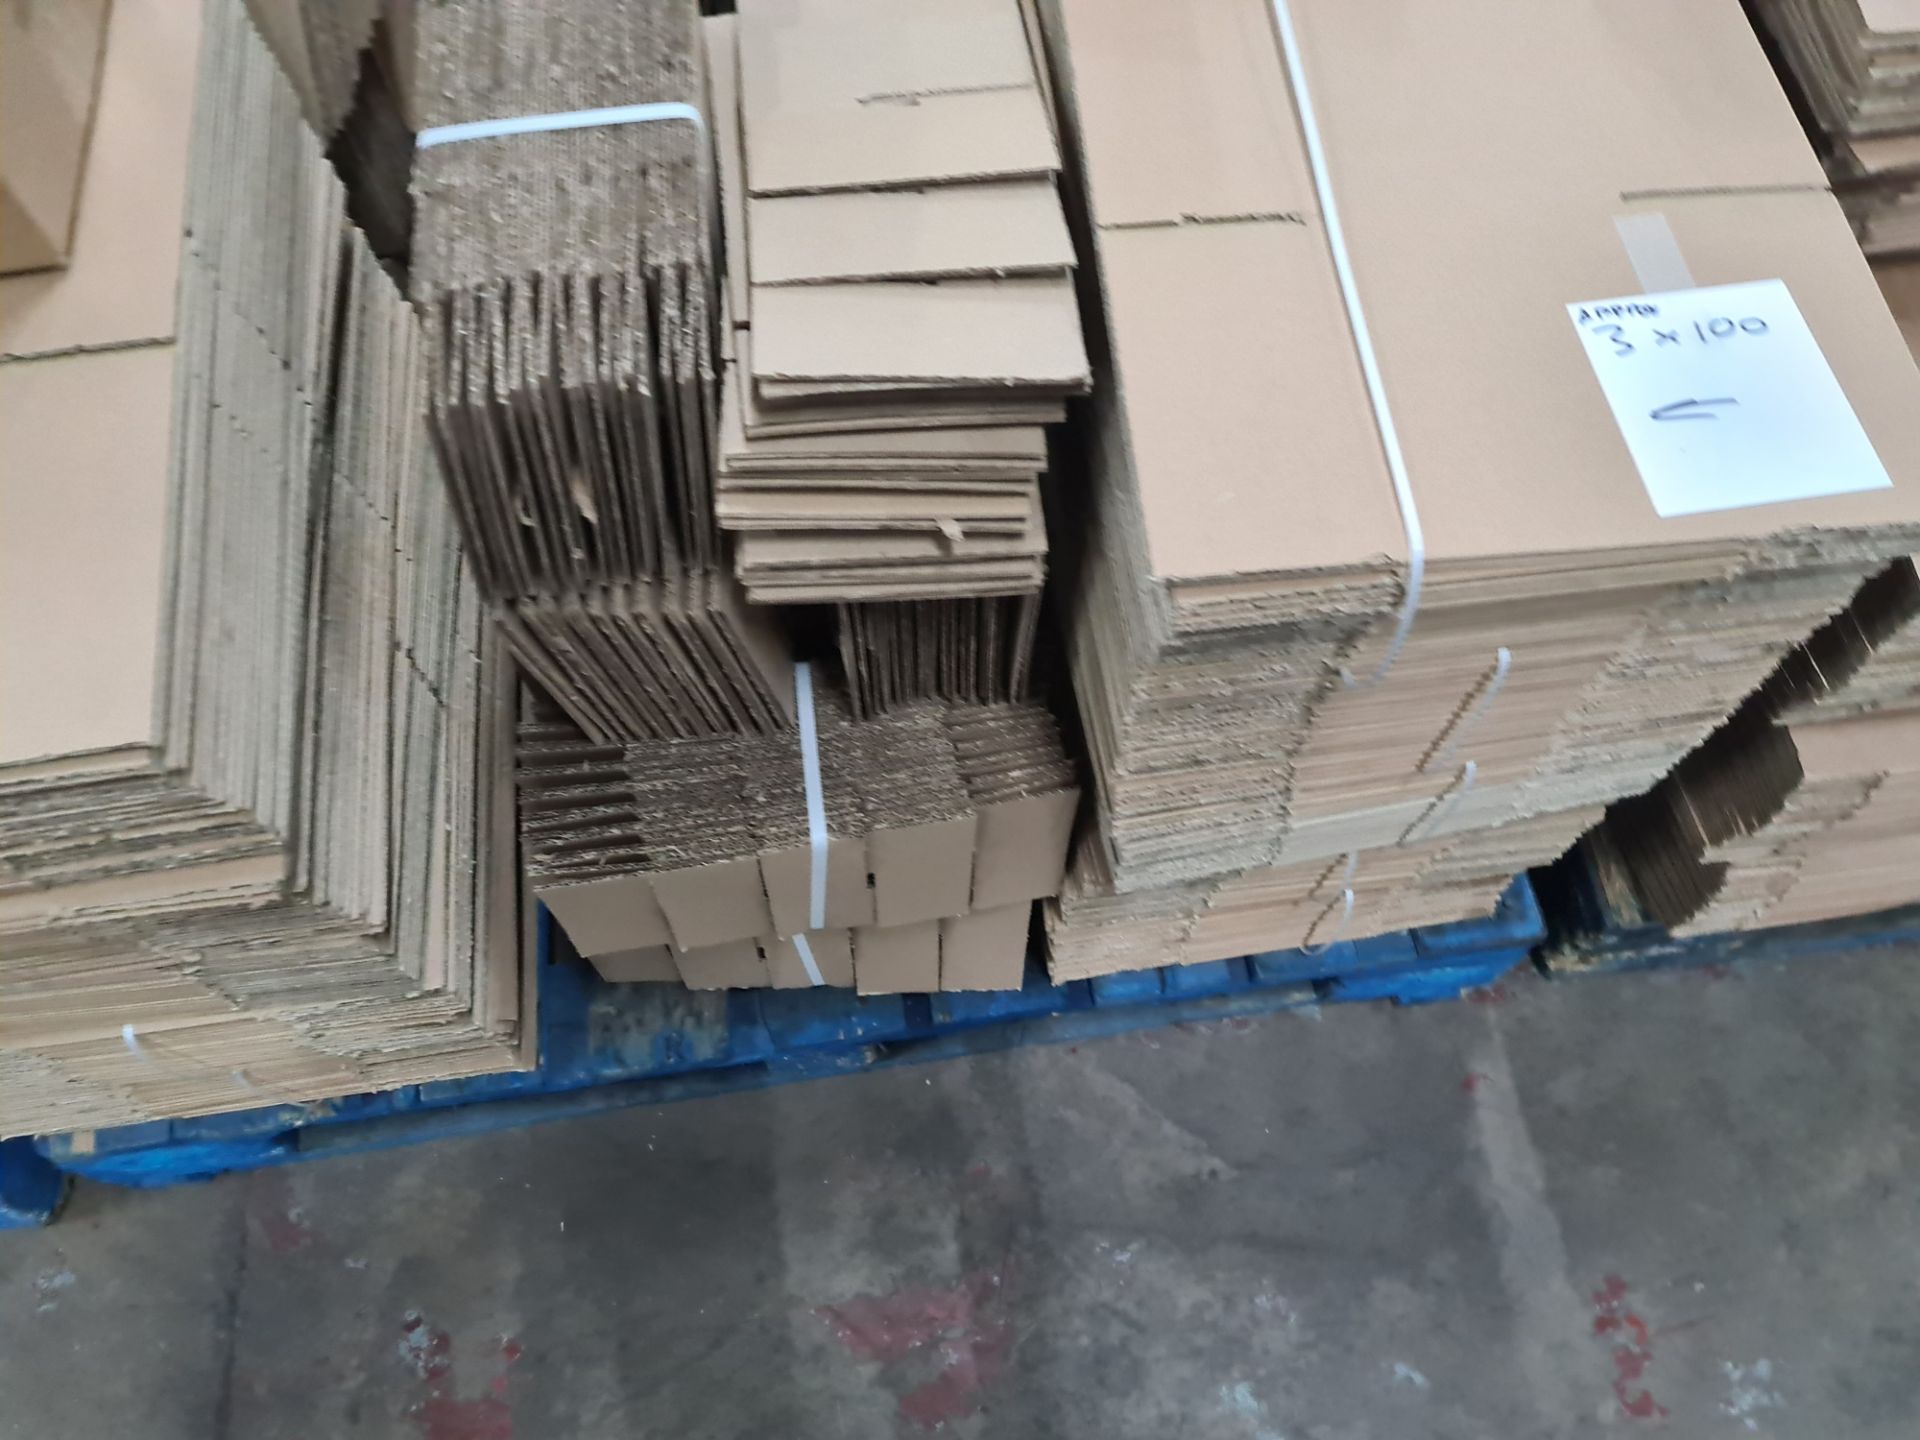 The contents of a pallet of cardboard boxes comprising approximately 300 boxes and 300 inserts in to - Image 10 of 10